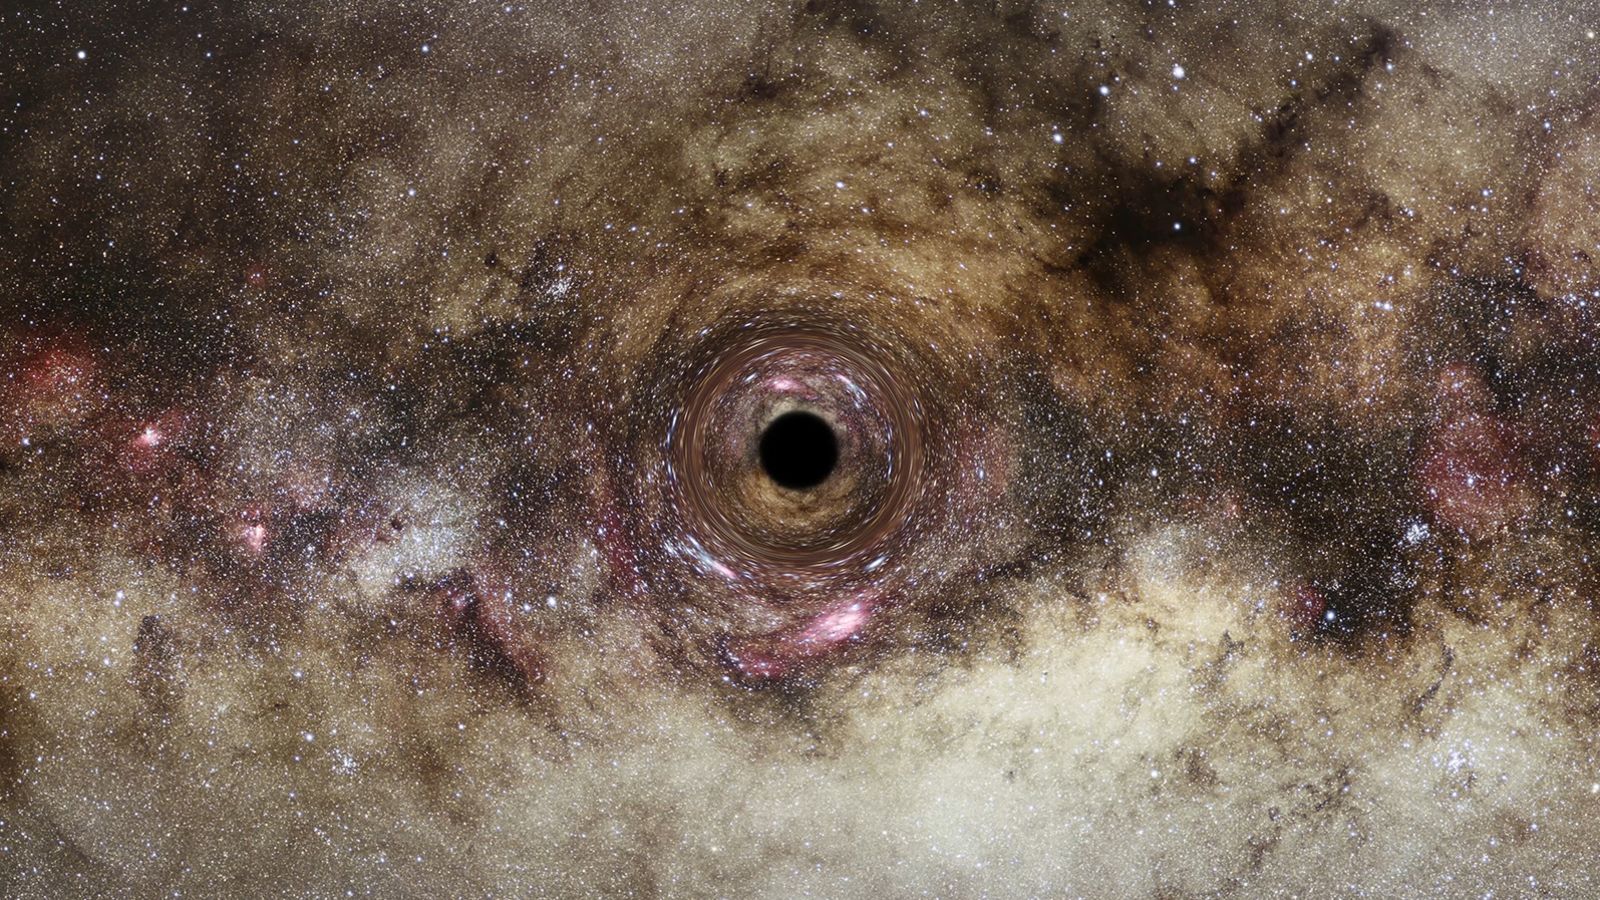 Astronomers discover a massive black hole using new technology